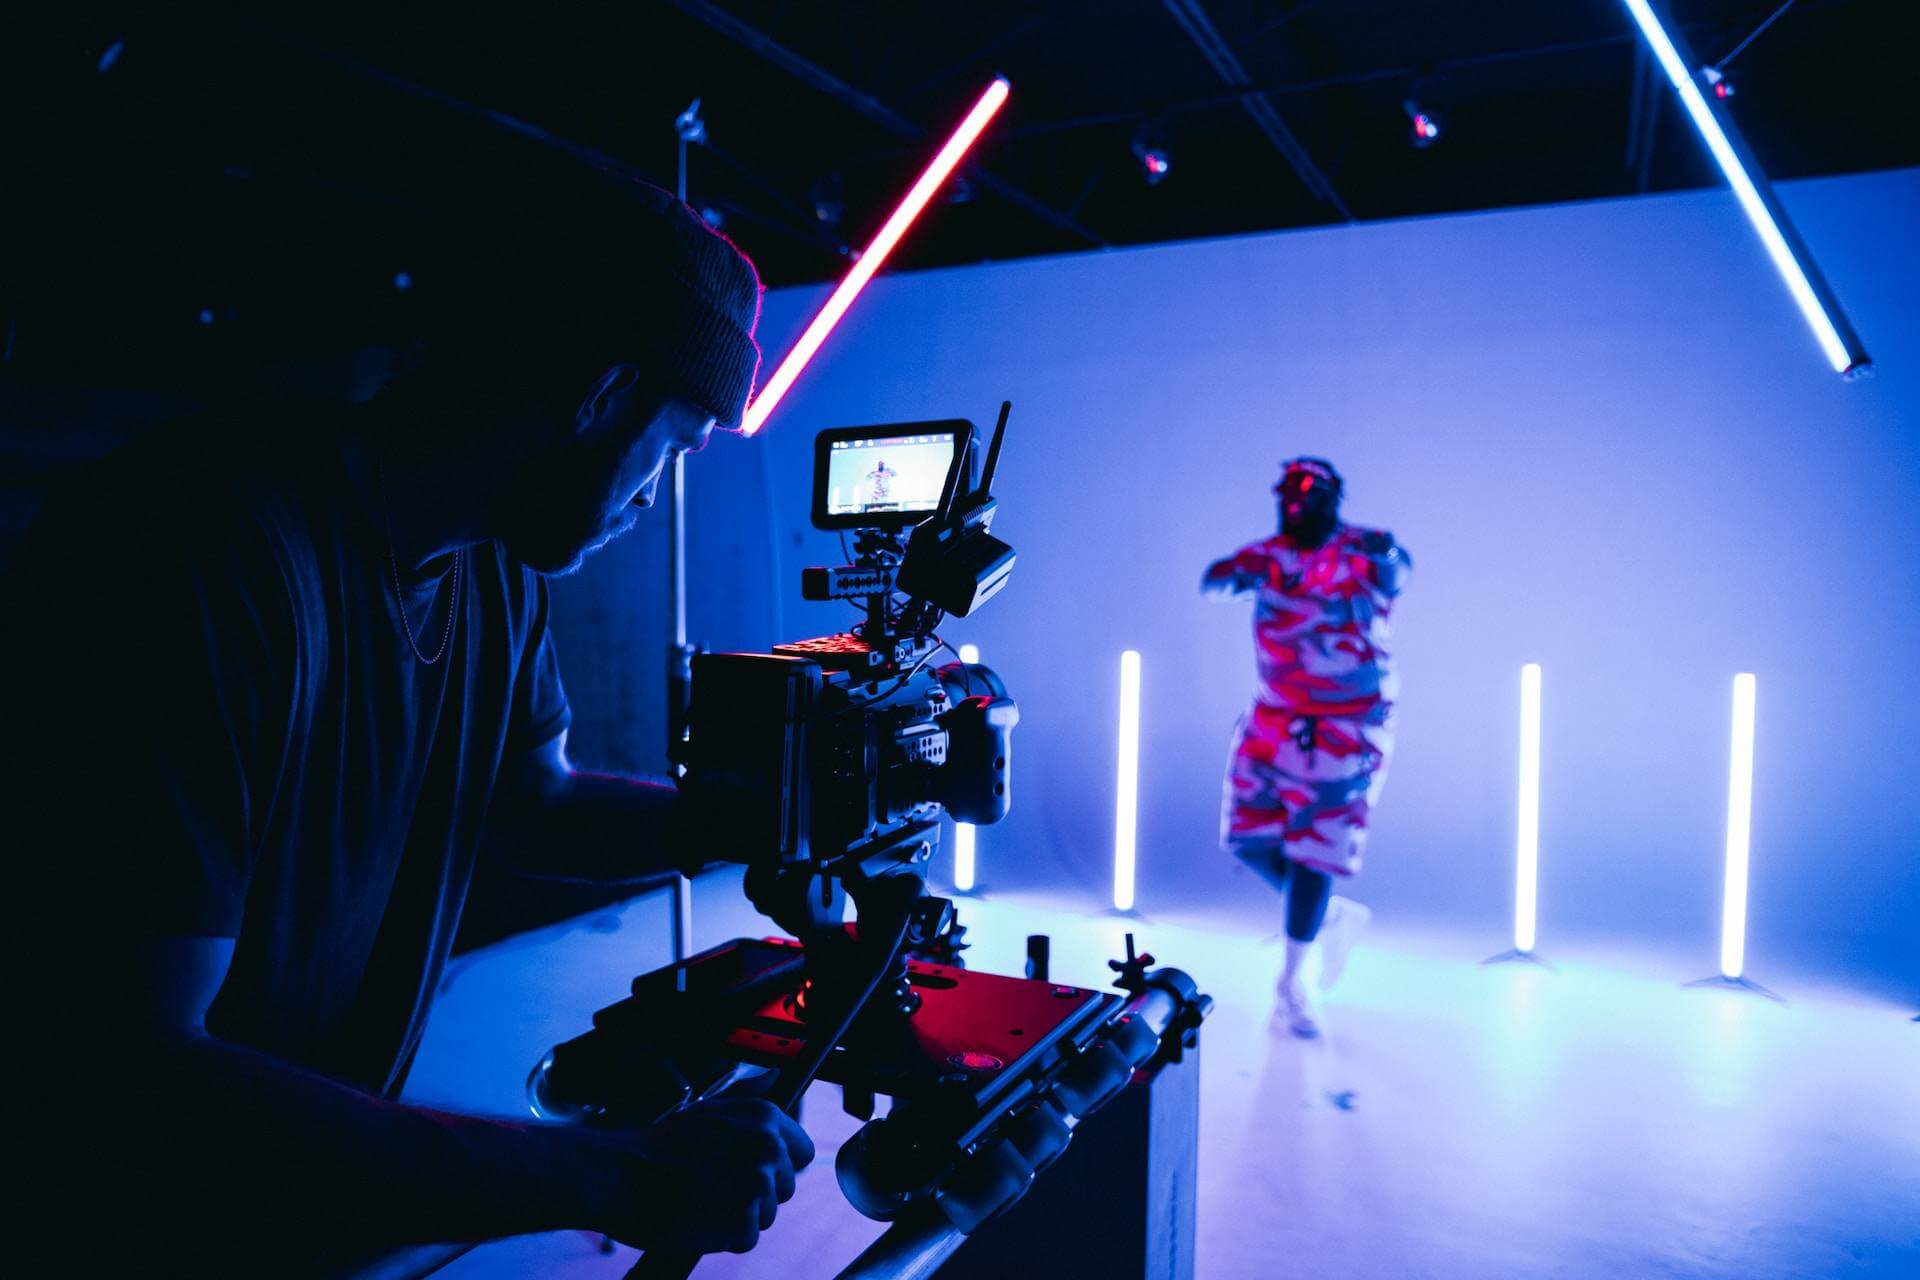 Music video production companies behind the shoot